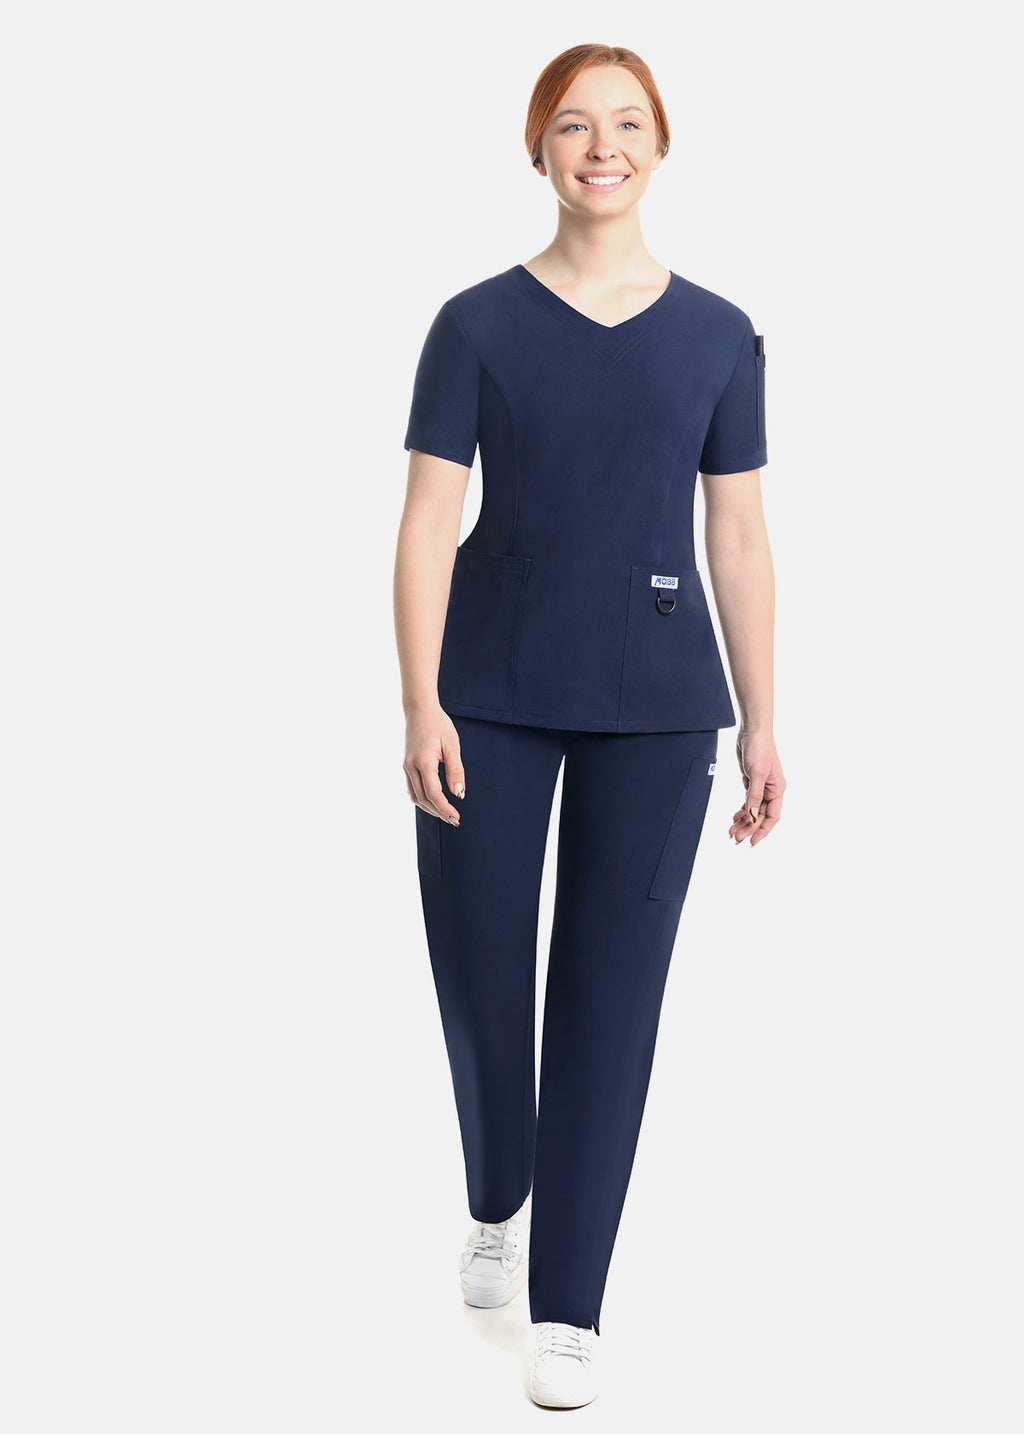 Product - The Angie V-Neck Scrub Top by MOBB